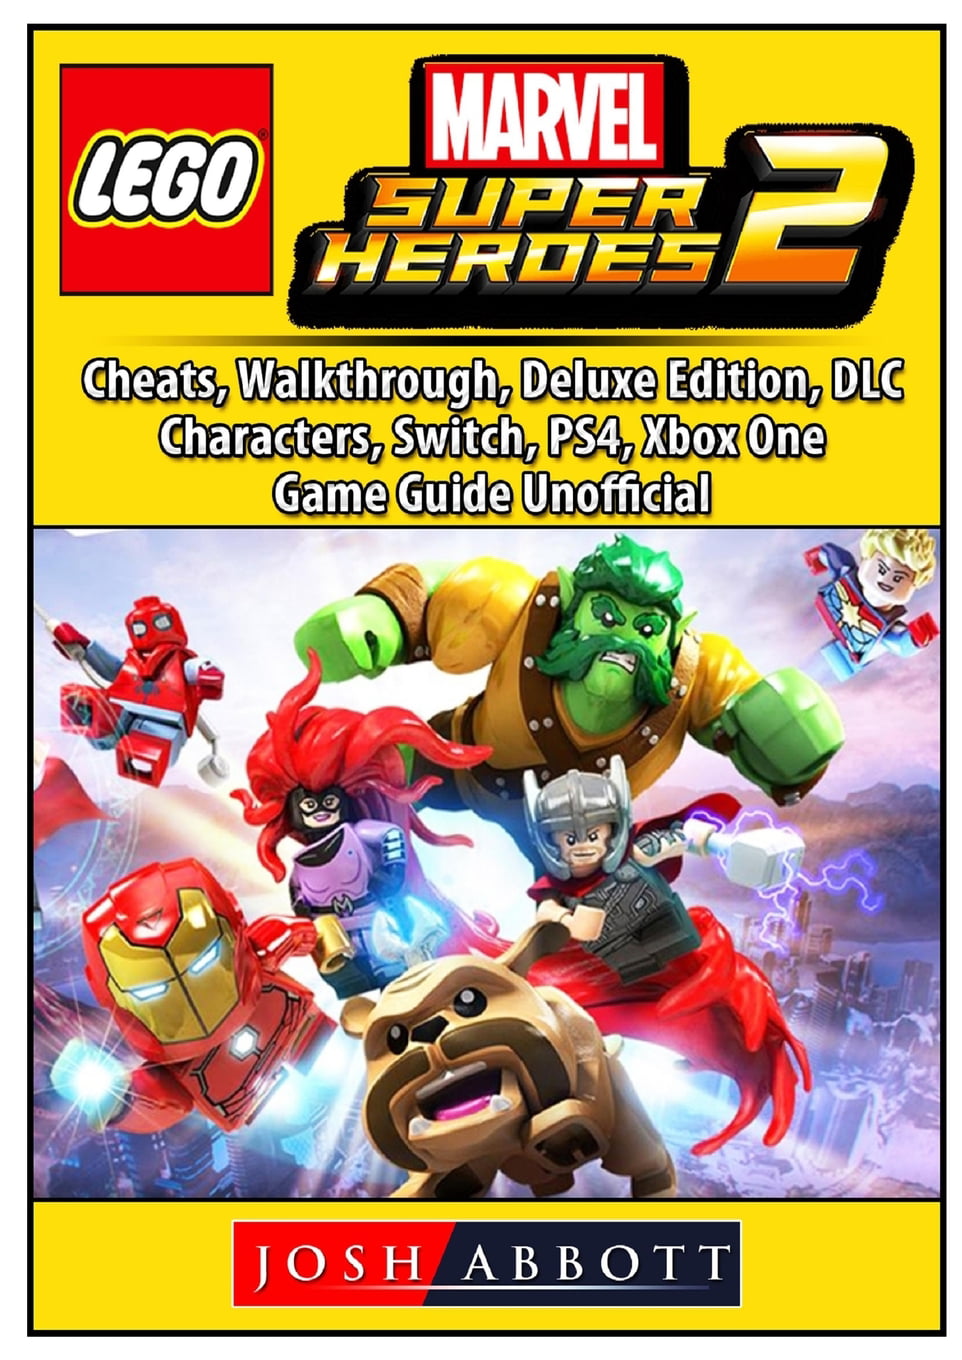 Lego Marvel Super Heroes 2, Switch, PS4, Xbox One, Cheats, Deluxe Edition,  DLC, Characters, Game Guide Unofficial eBook by Chala Dar - EPUB Book